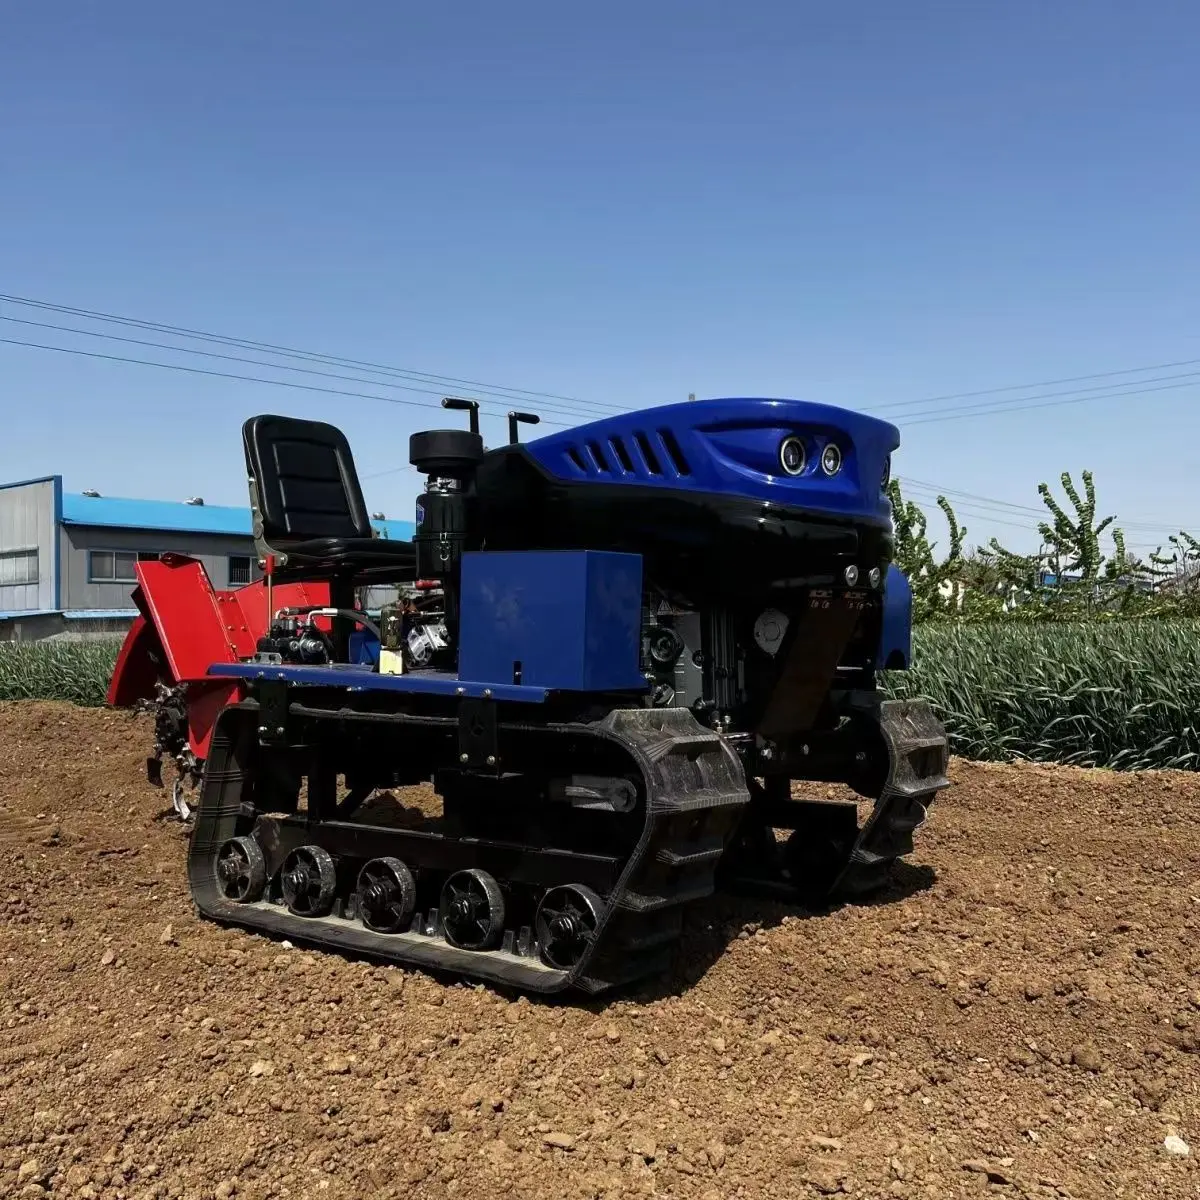 

Riding tracked rotary tiller for ditching, fertilizing, harvesting, and multifunctional four-wheel drive micro tillage